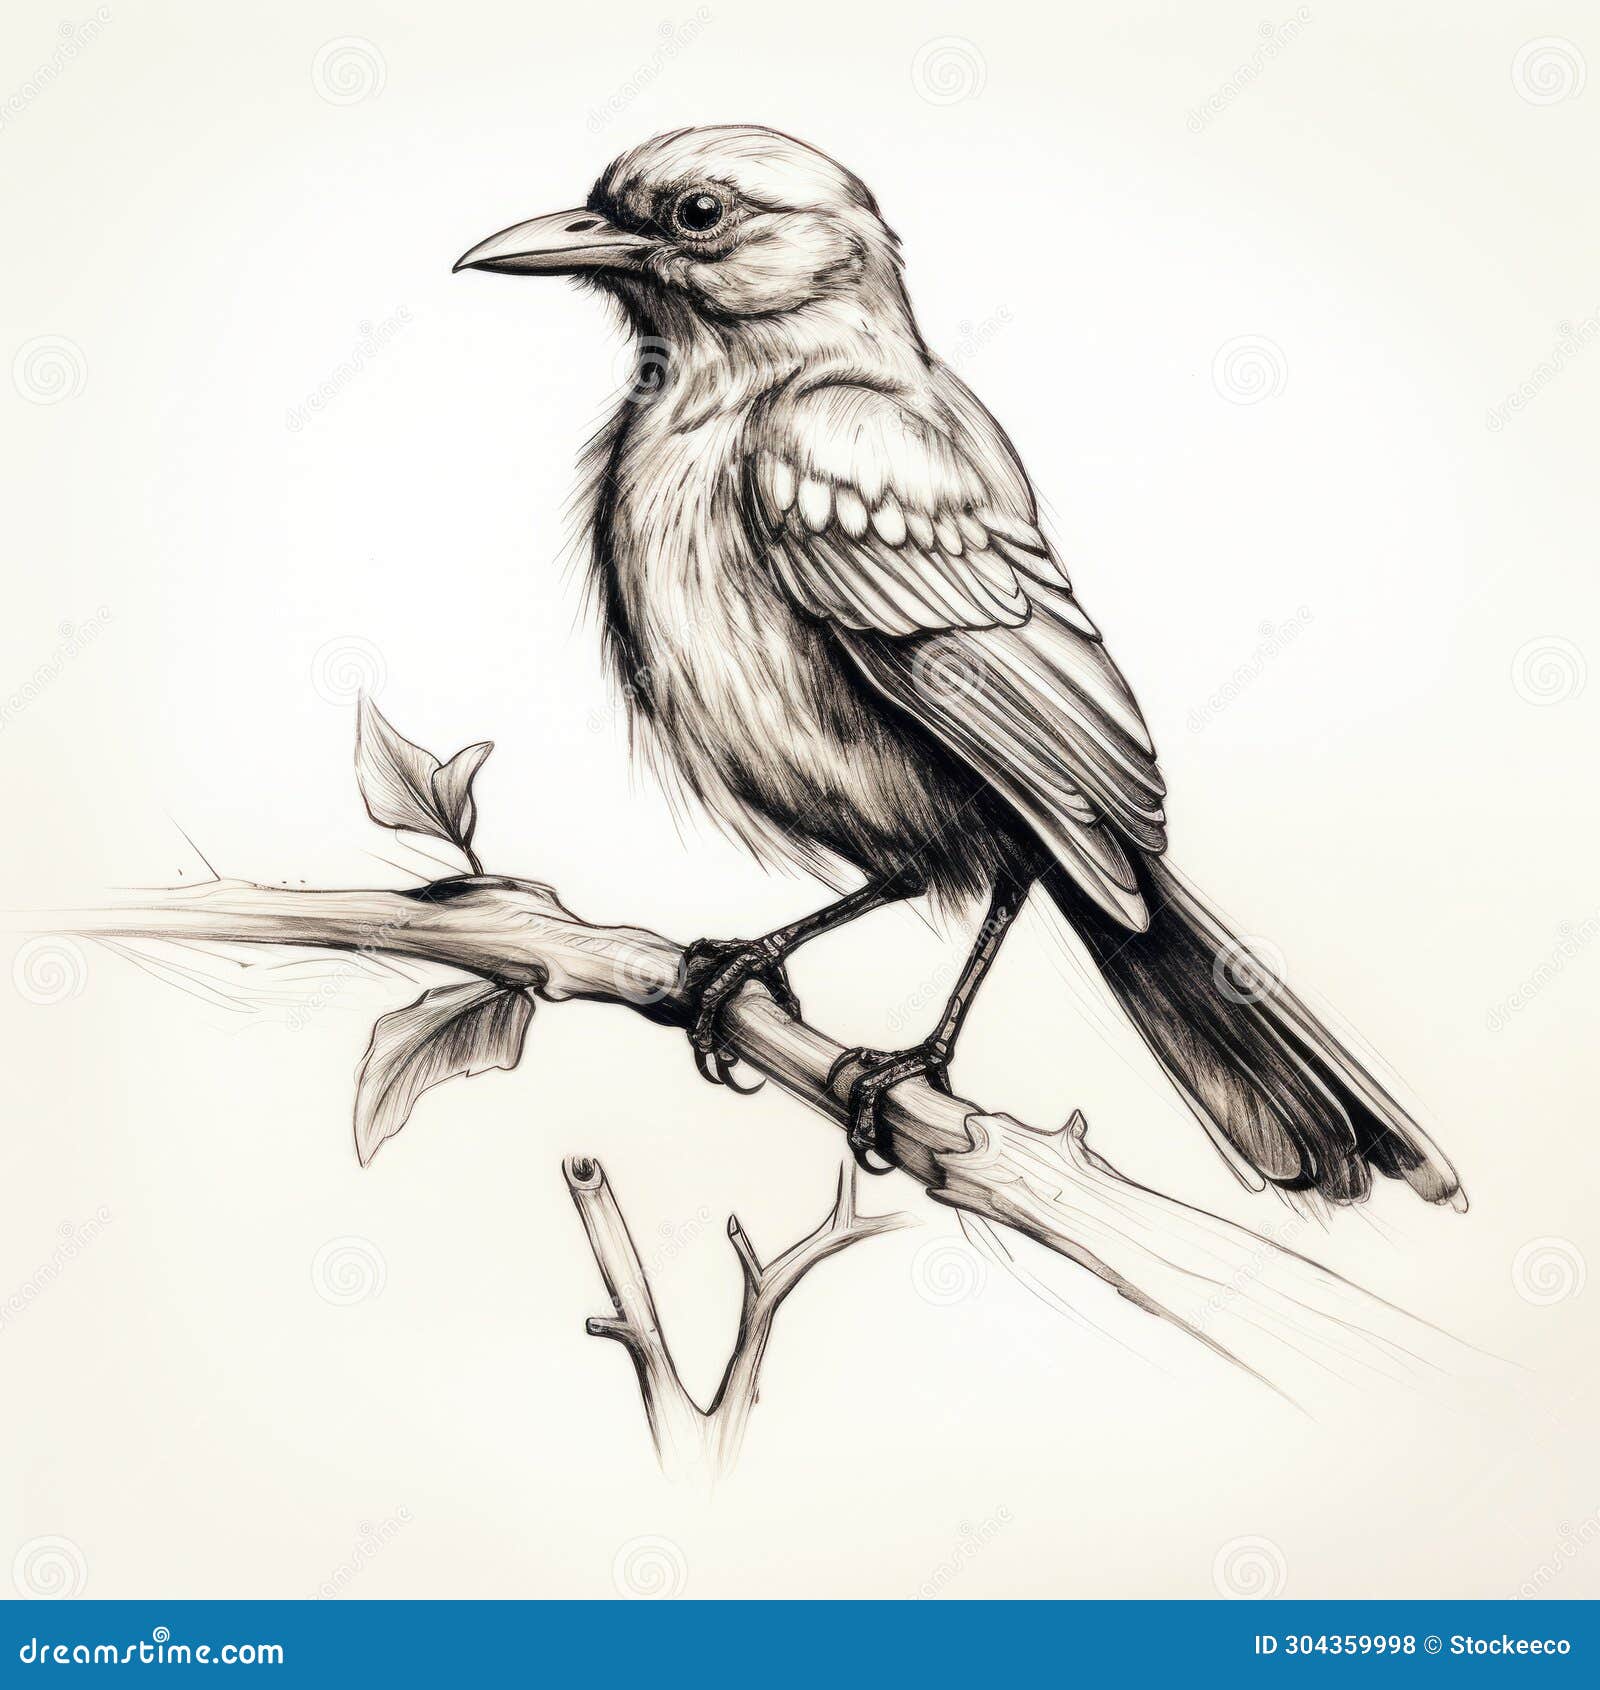 Realistic Hand Drawn Bird Perched on Branch Illustration Stock ...